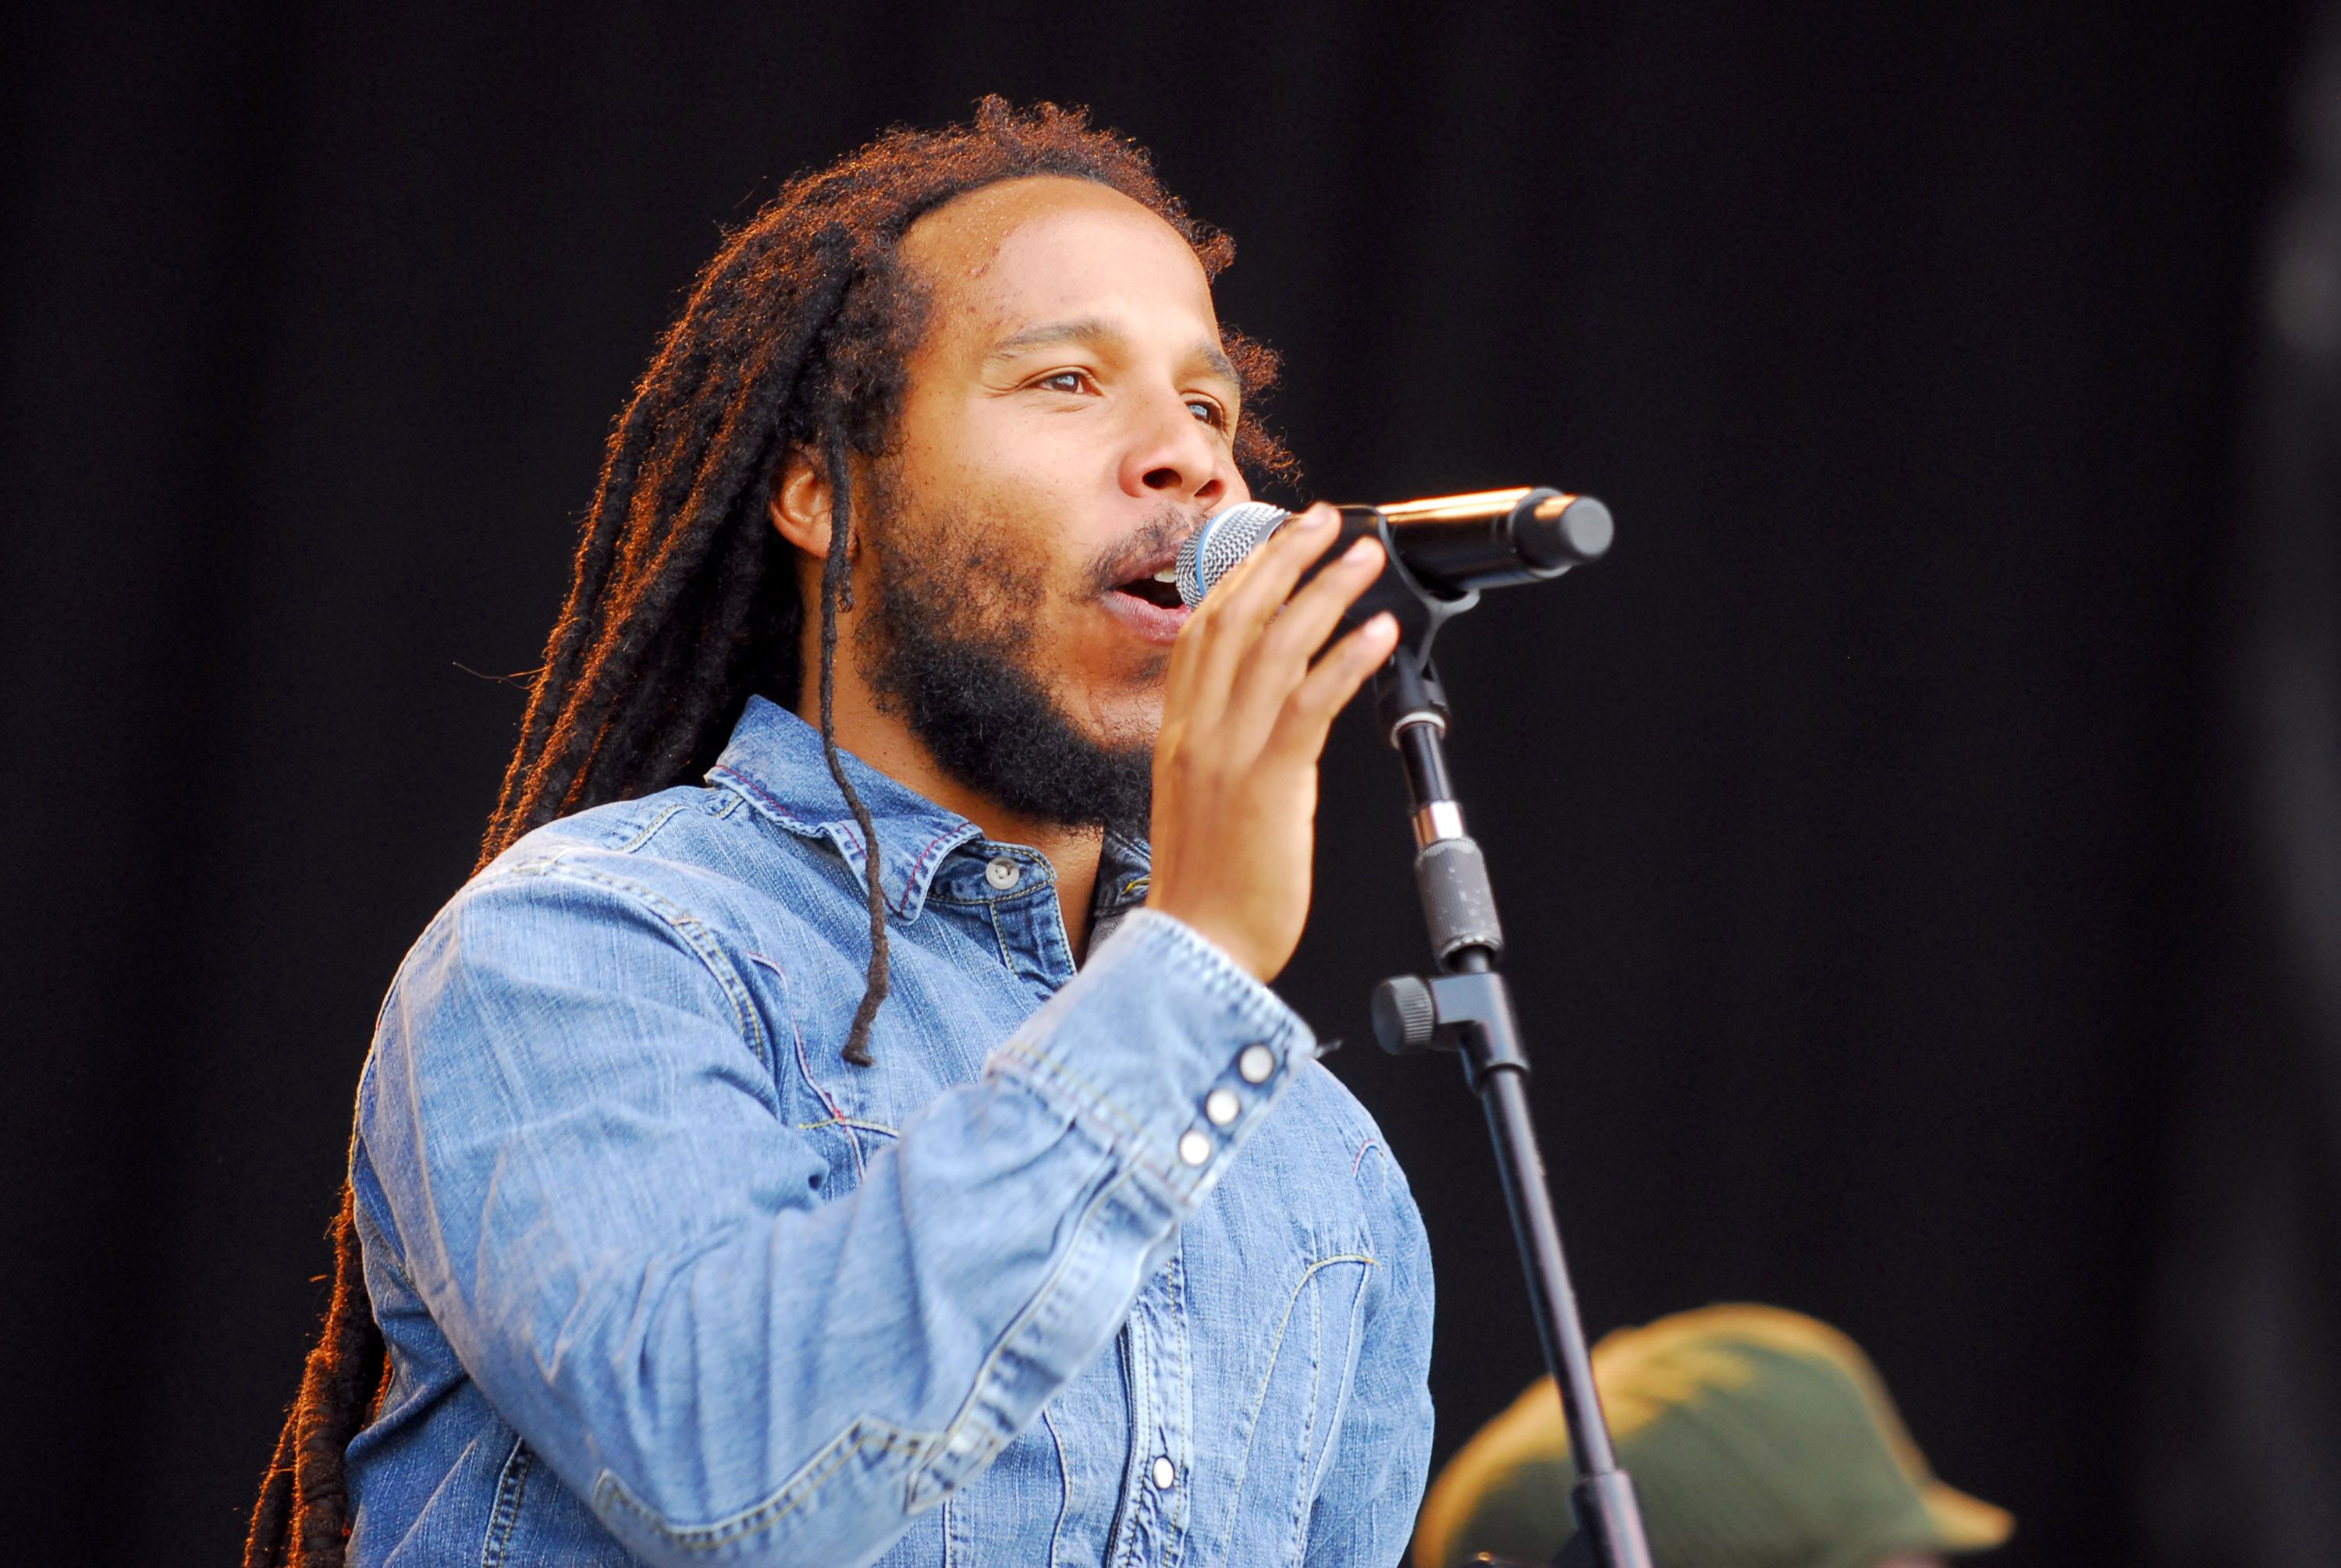 Ziggy Marley during  the second day of Bonnaroo 2007 at What Stage in Manchester, Tennessee, United States. | Source: Getty Images